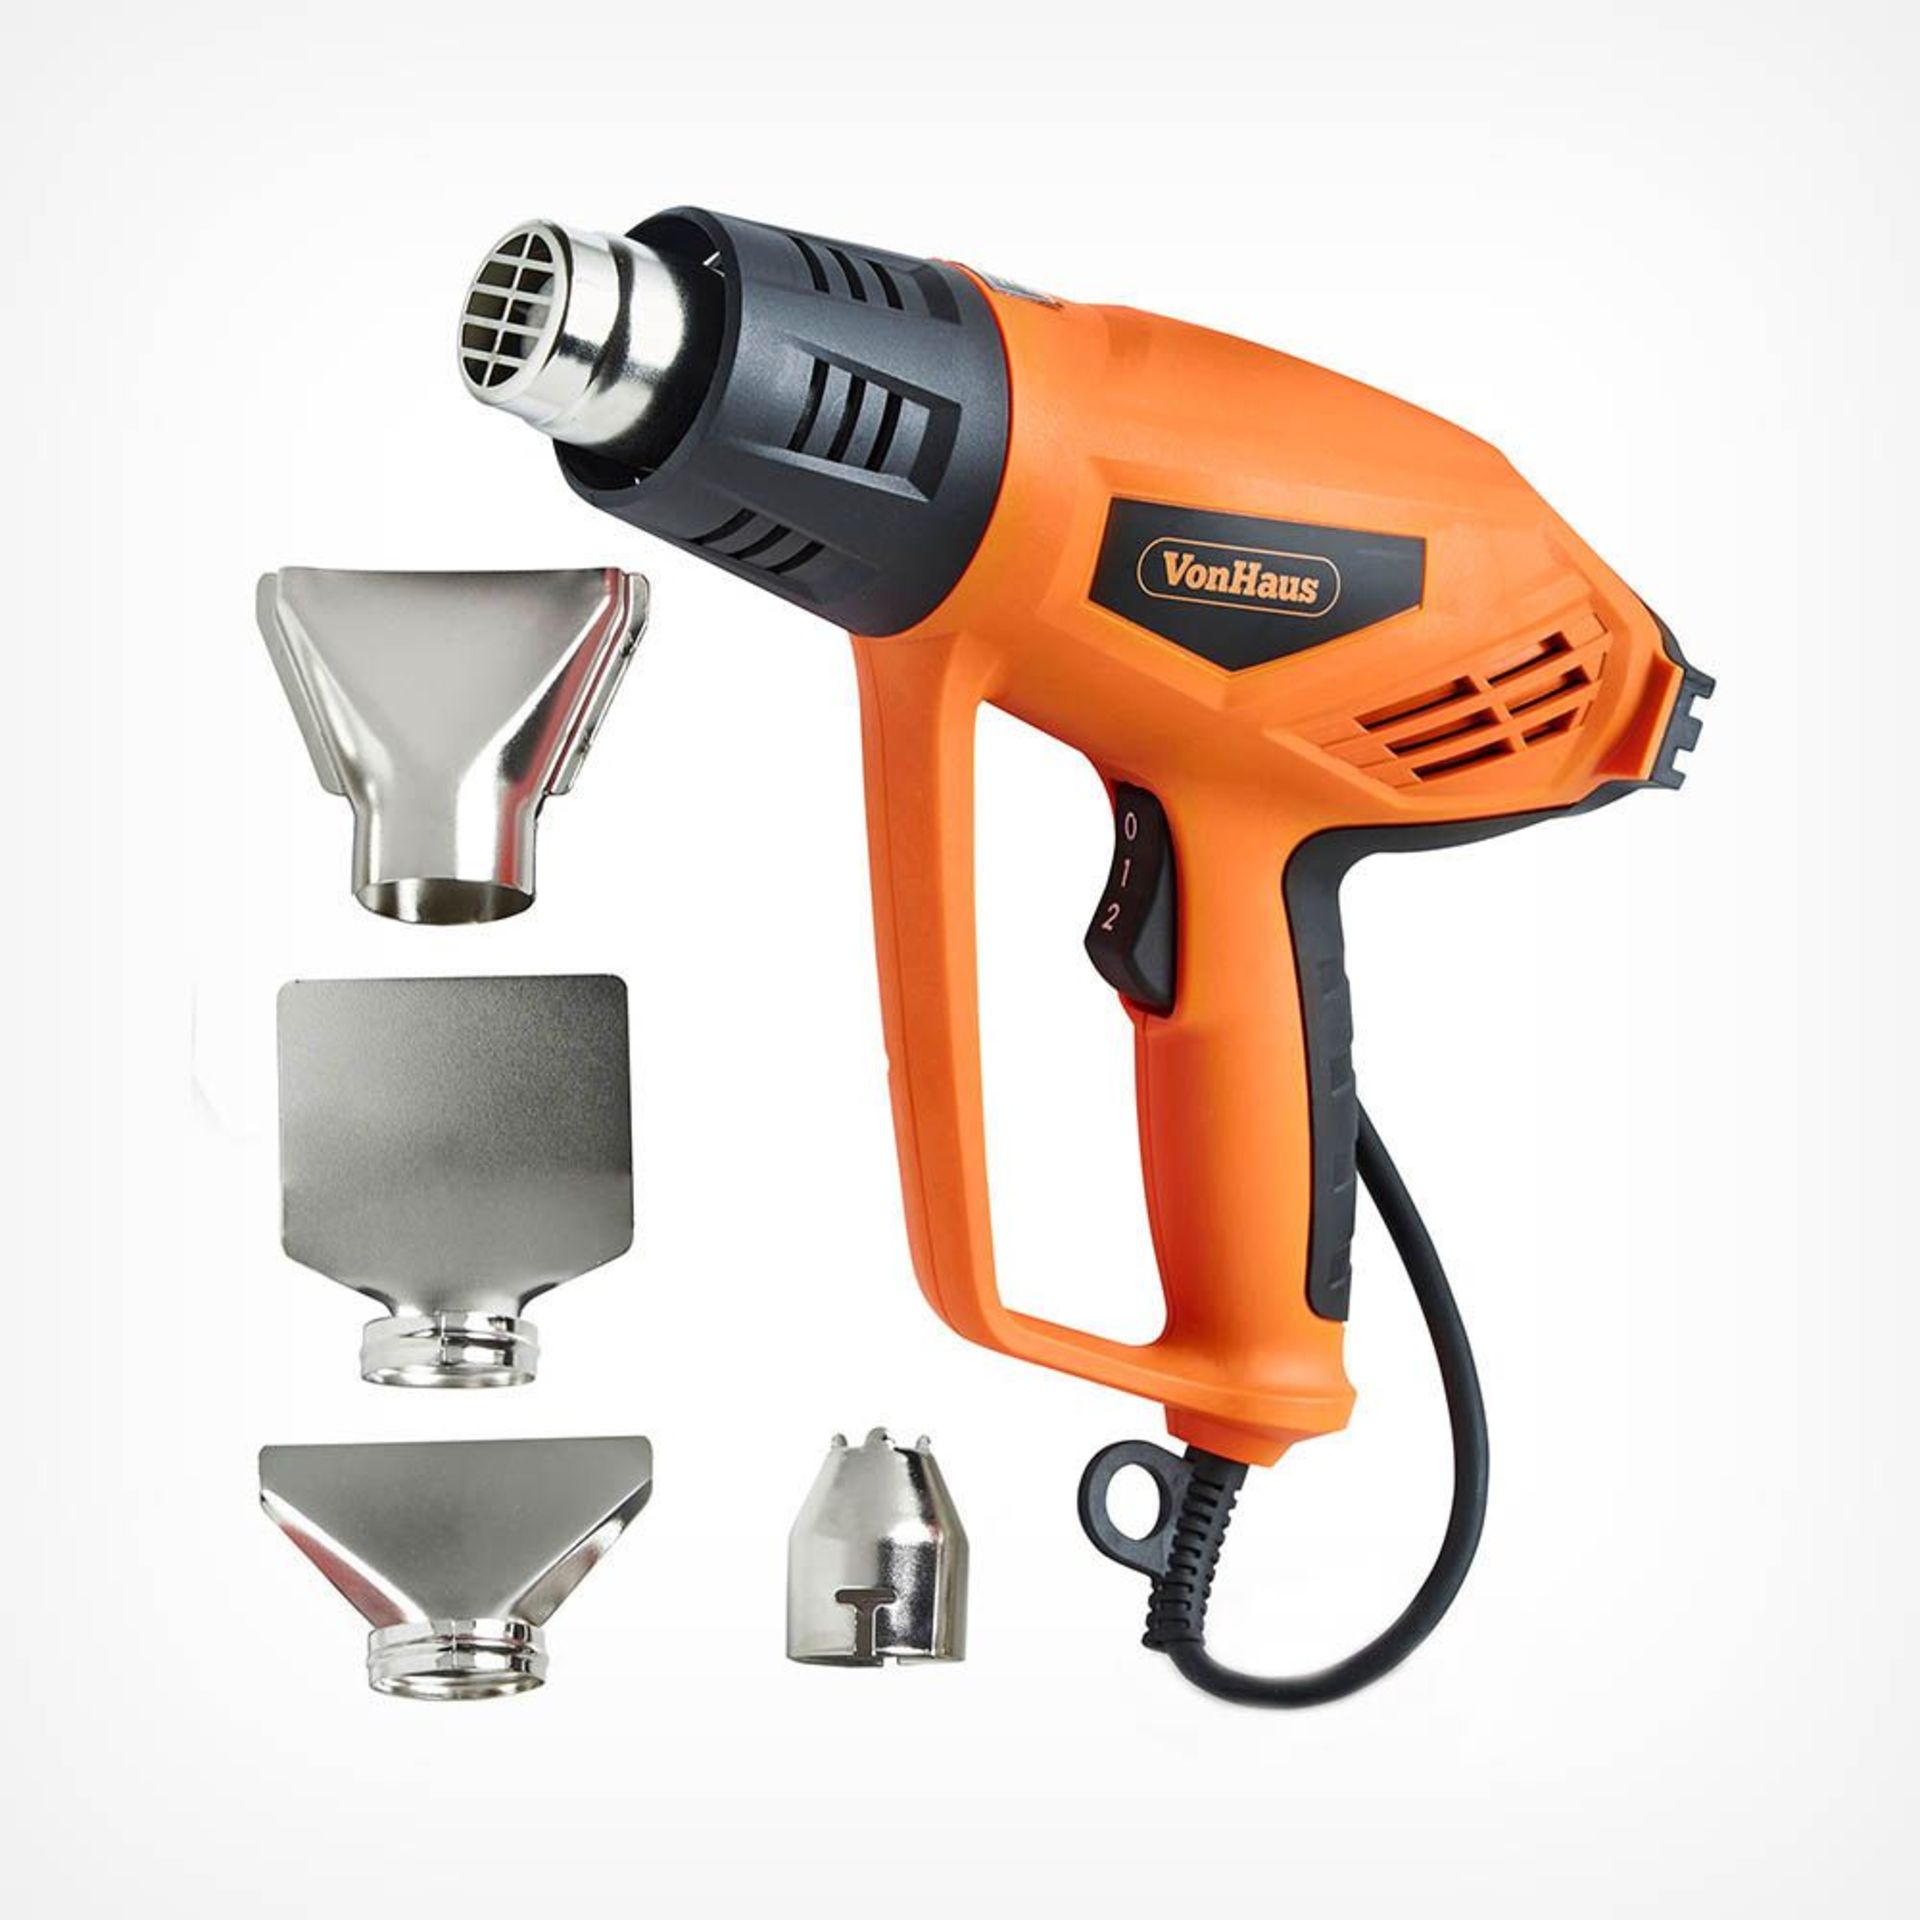 2000W Heat Gun. - BI. Ever tried scraping off paint or taking up vinyl flooring with hand tools